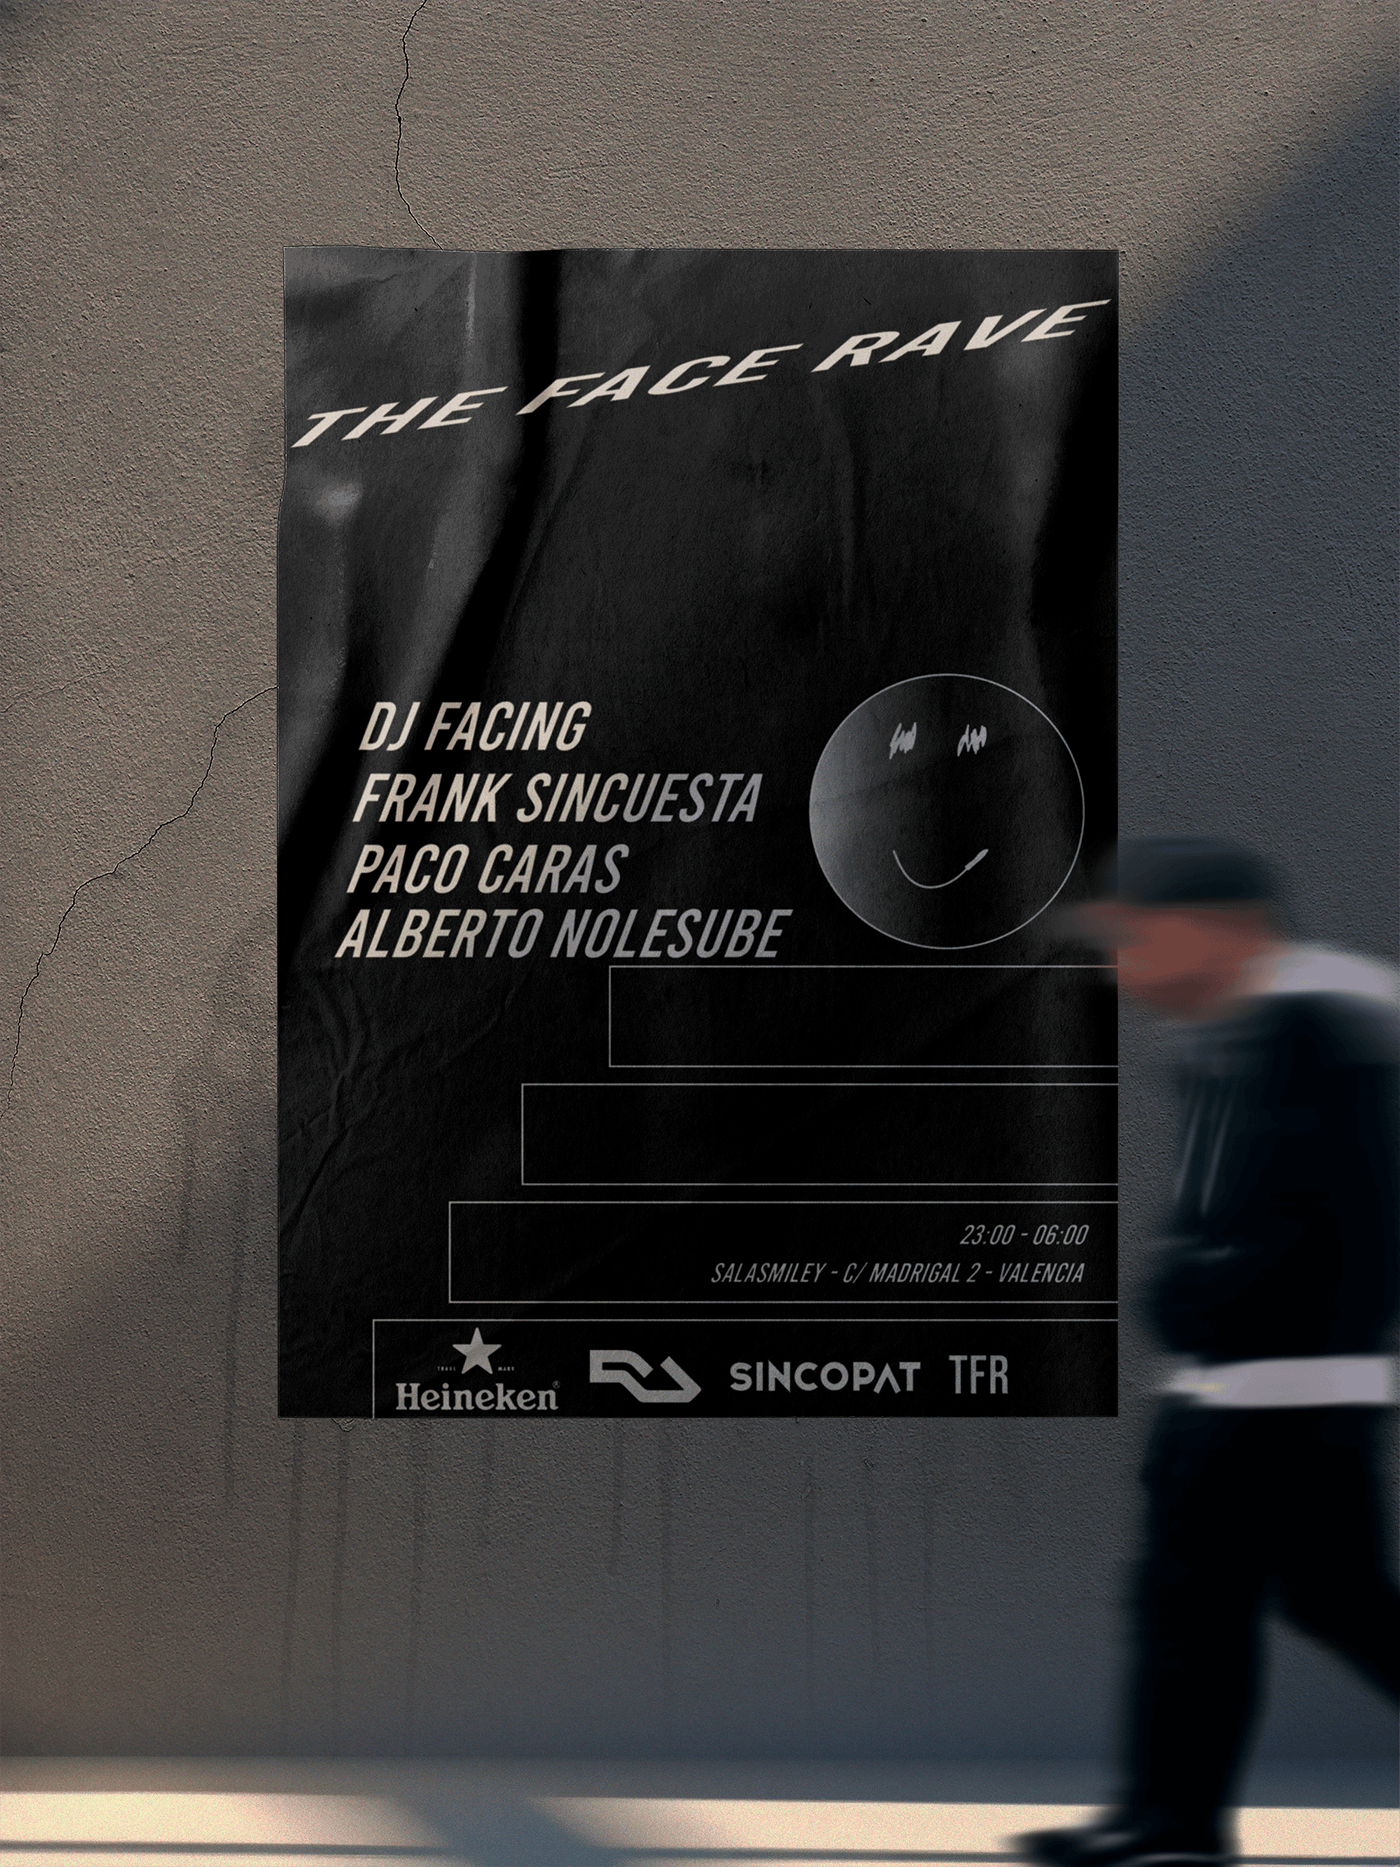 The Face Rave Techno Party Flyer Poster - Explore how the poster looks on a wall.